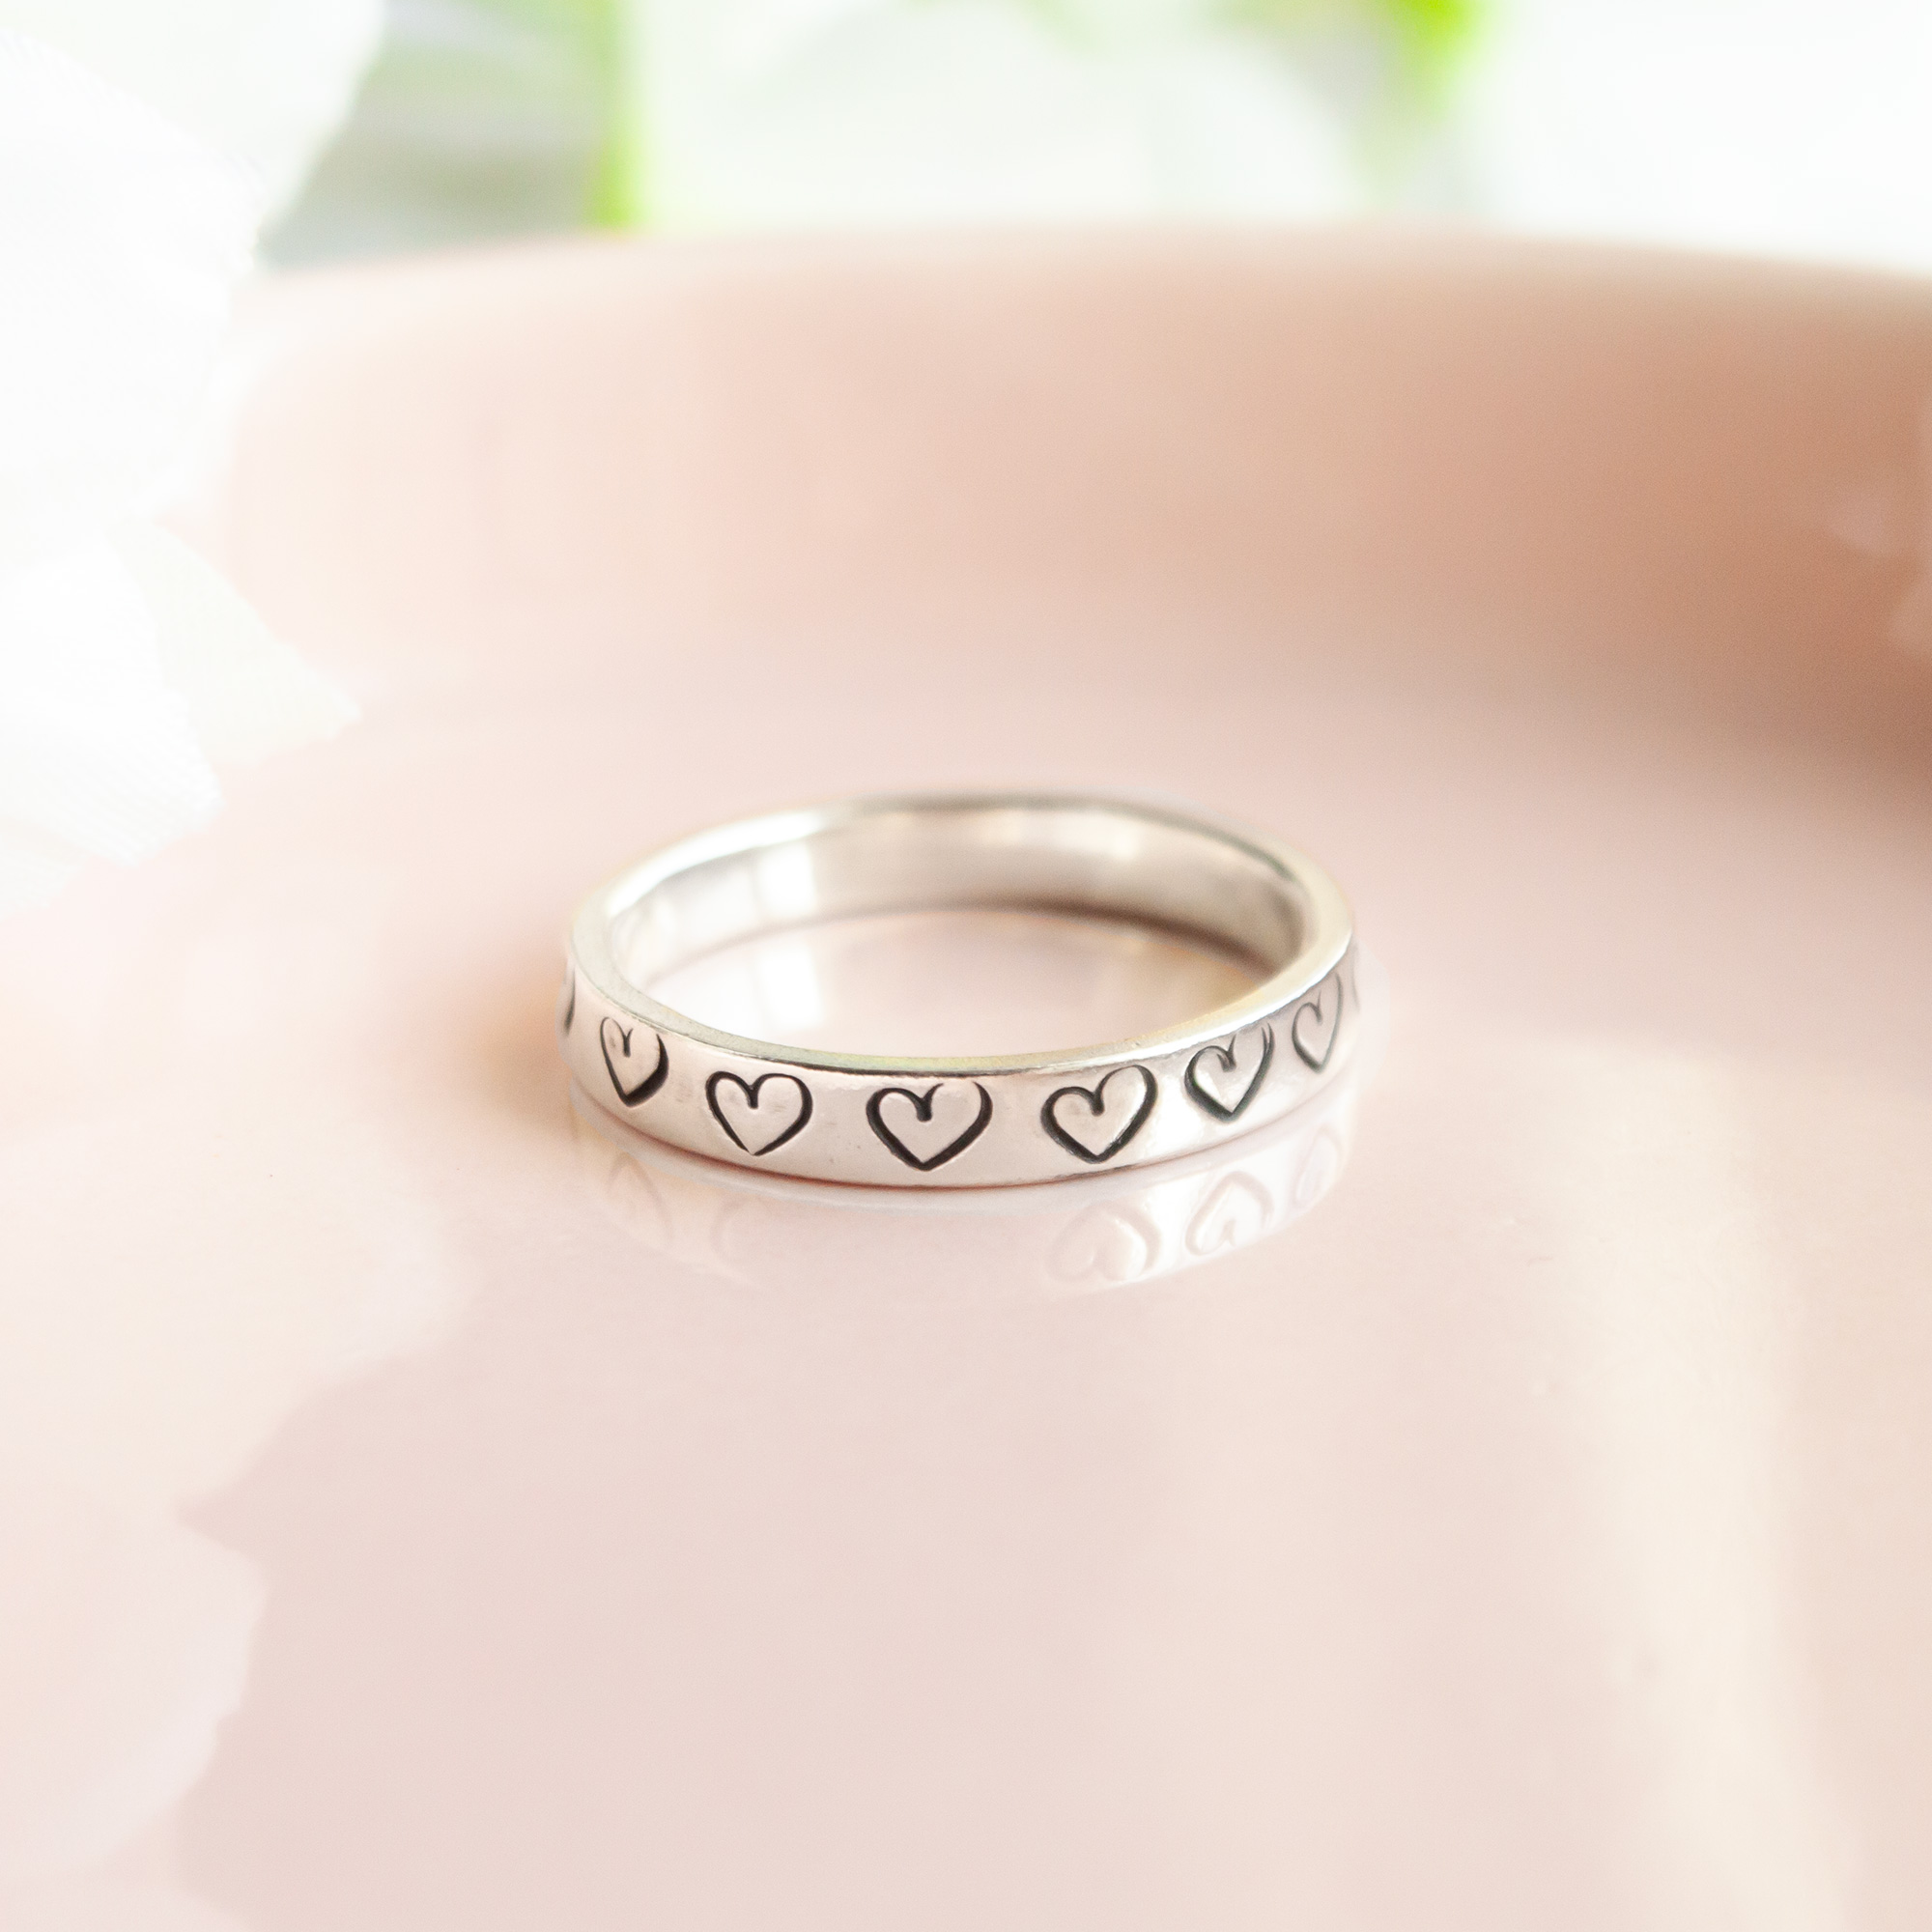 Heartbeat heart stamped silver stacking ring